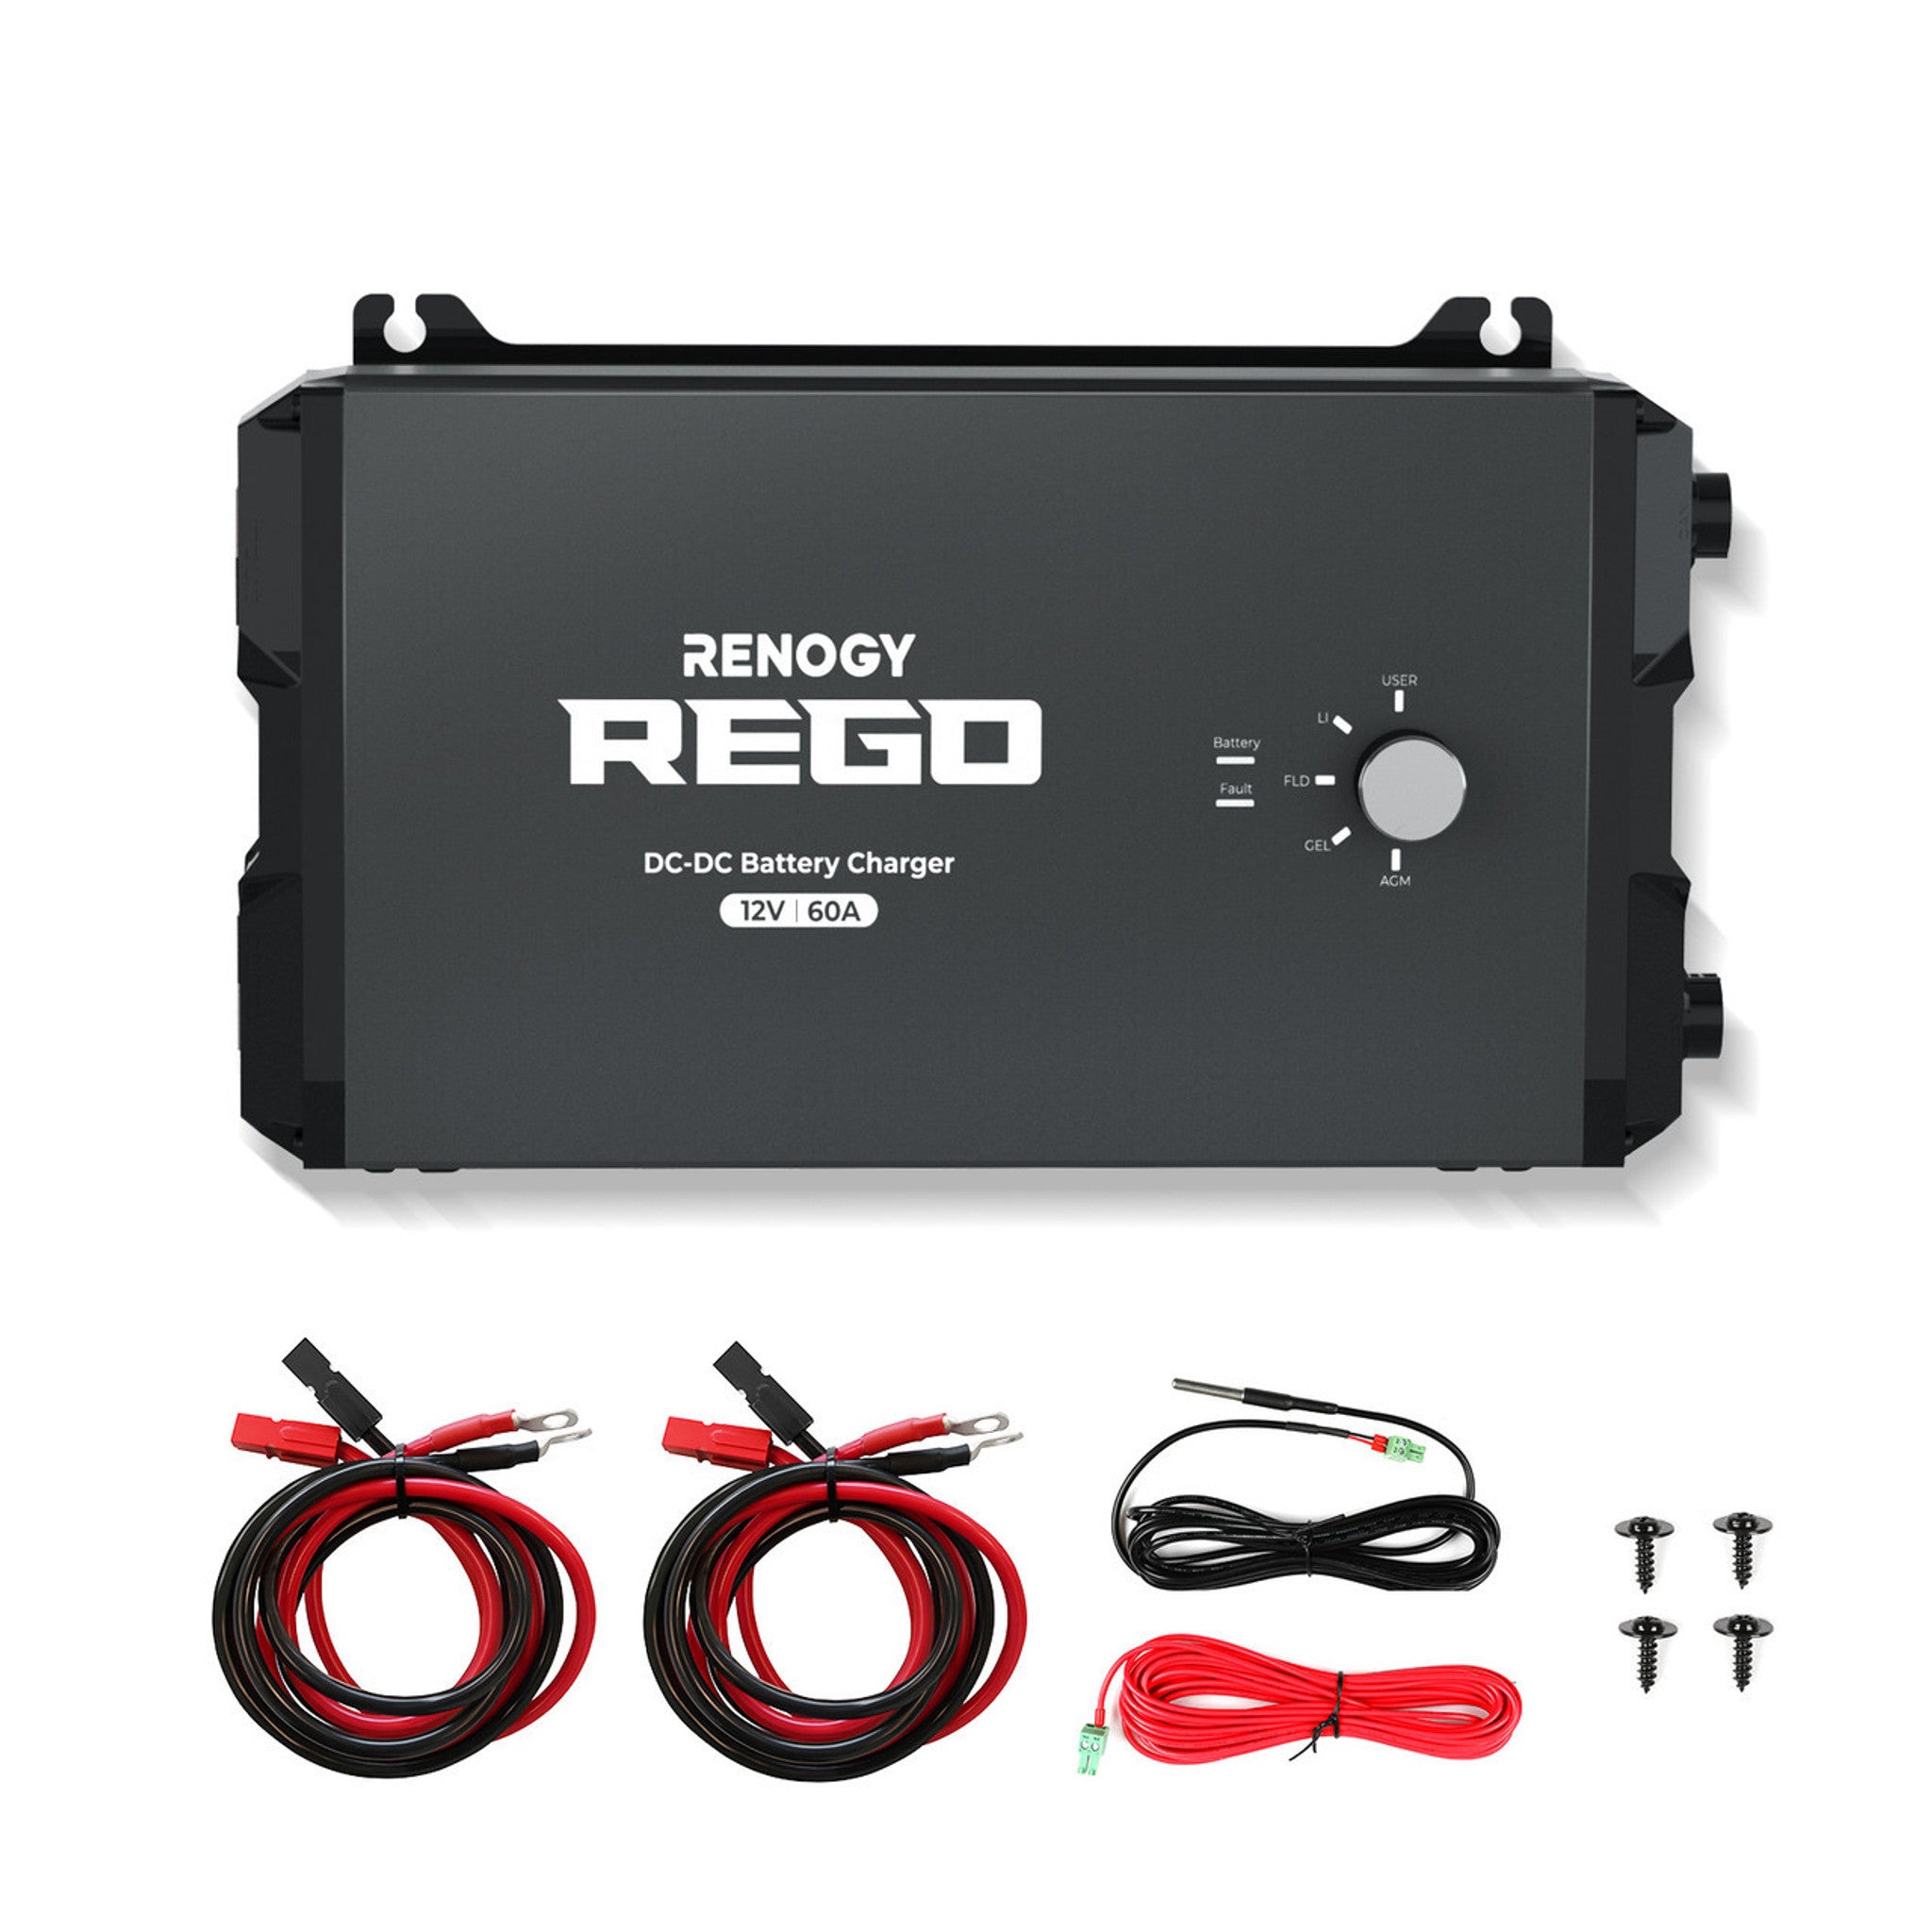 Renogy REGO 12V 60A DC-DC Battery Charger with Anderson terminals